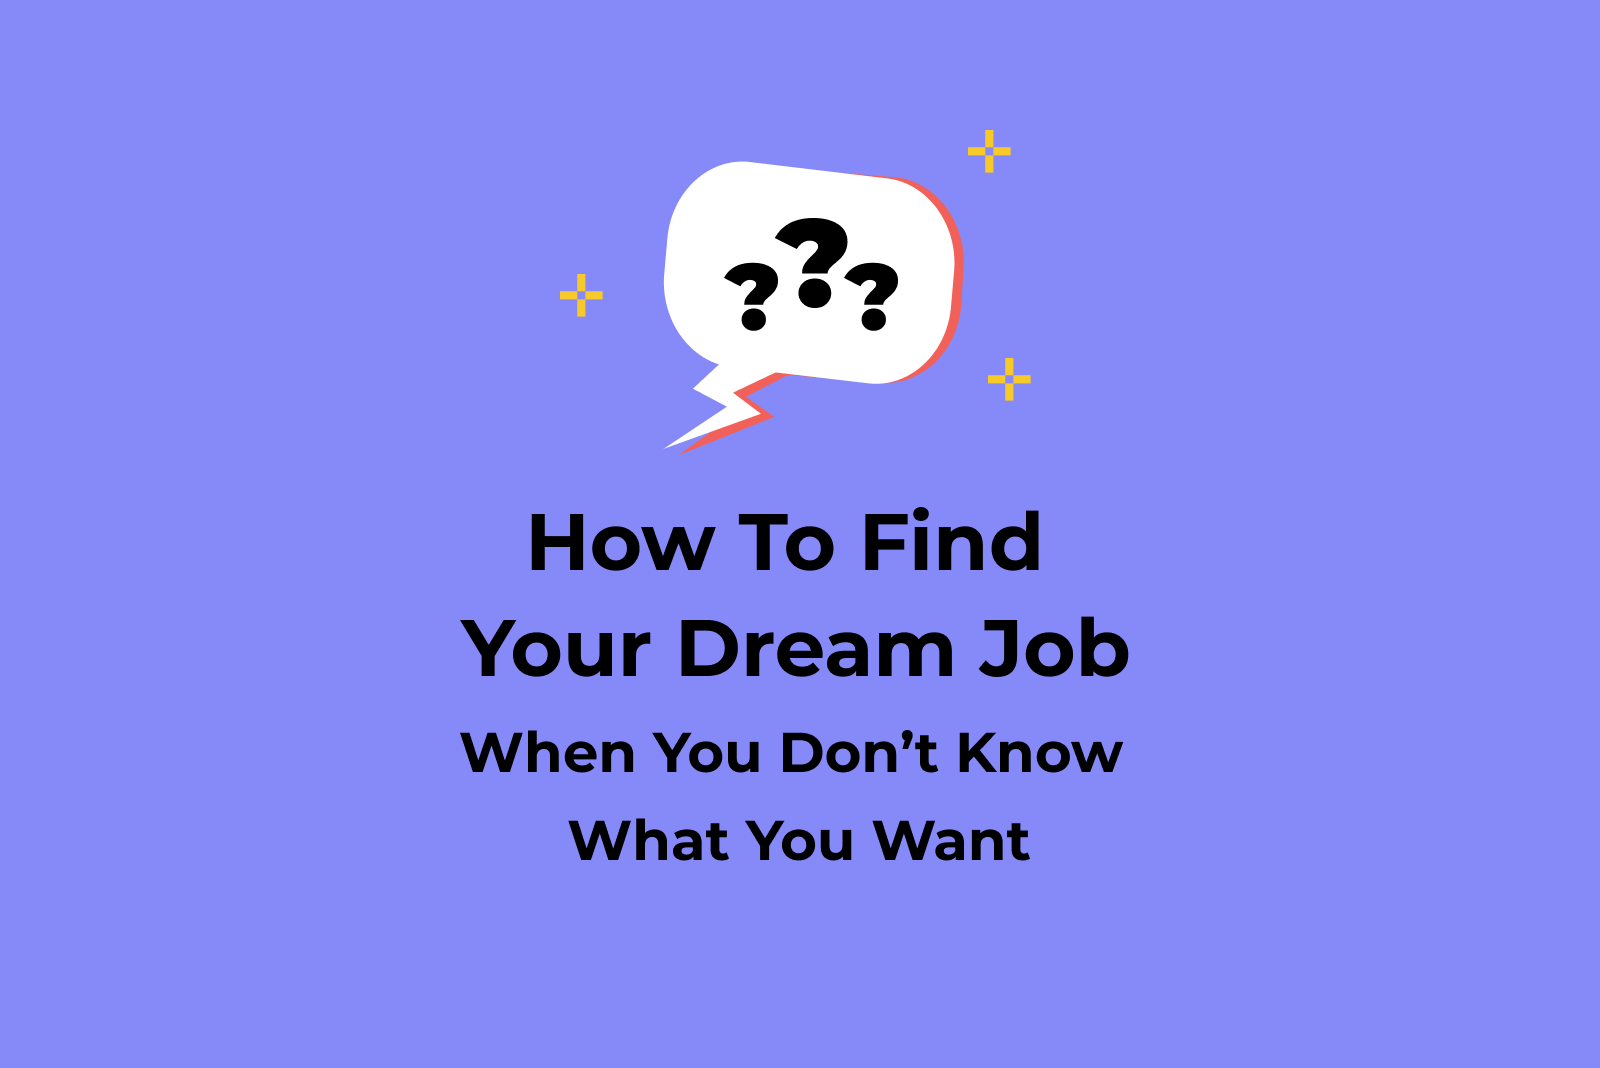 How to Find Your Dream Job